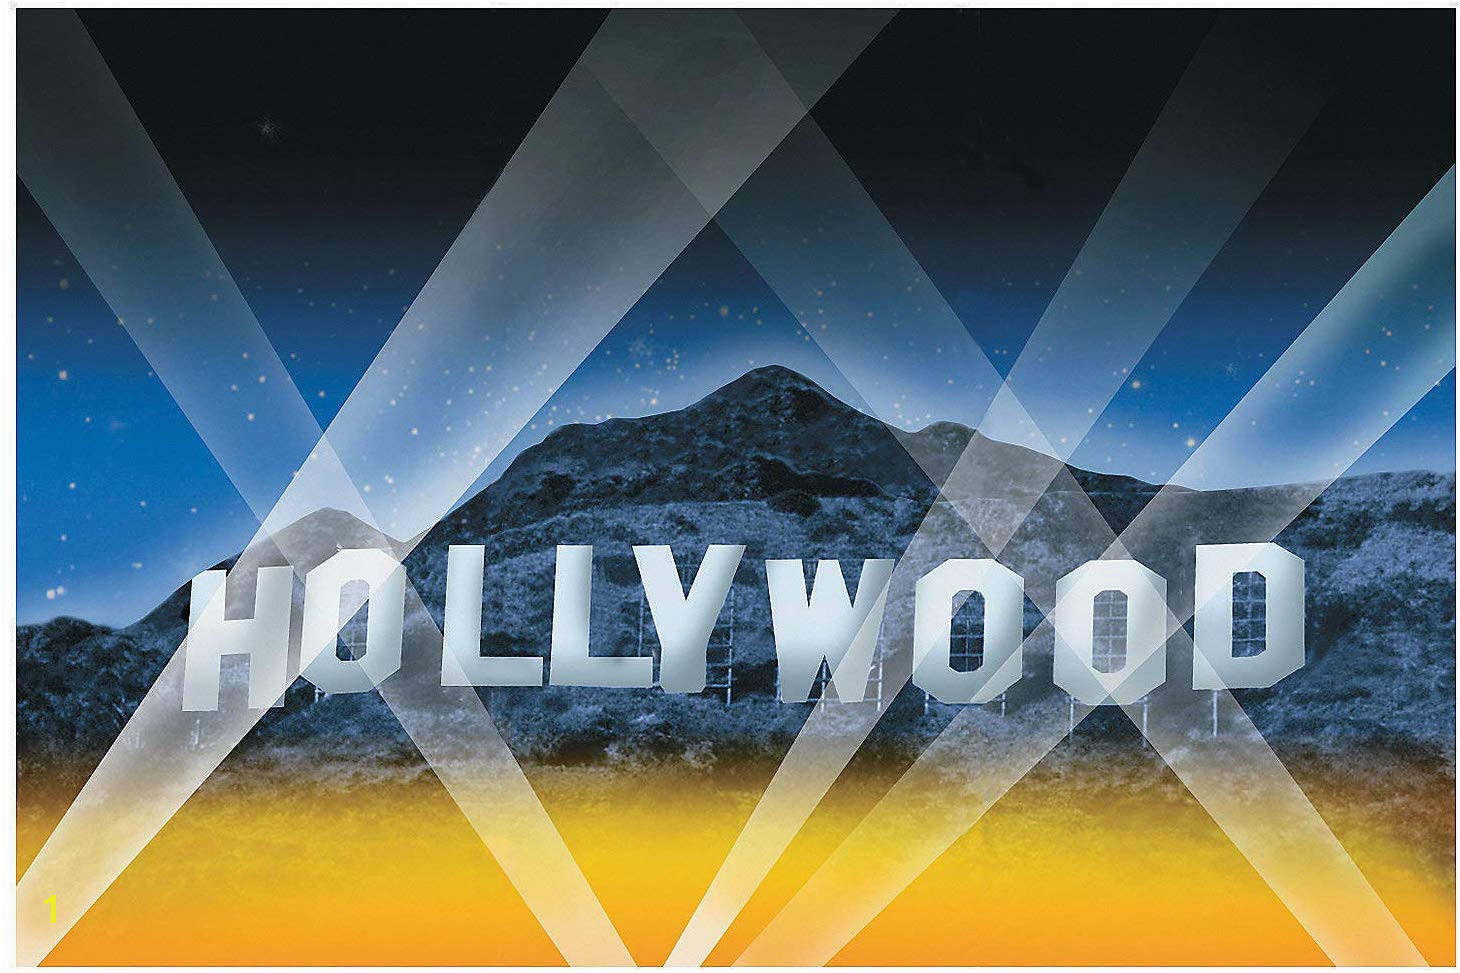 You are the Star Wall Mural Hollywood Fun Express Hollywood Hills Backdrop Banner for Party Party Decor Wall Decor Preprinted Backdrops Party 3 Pieces